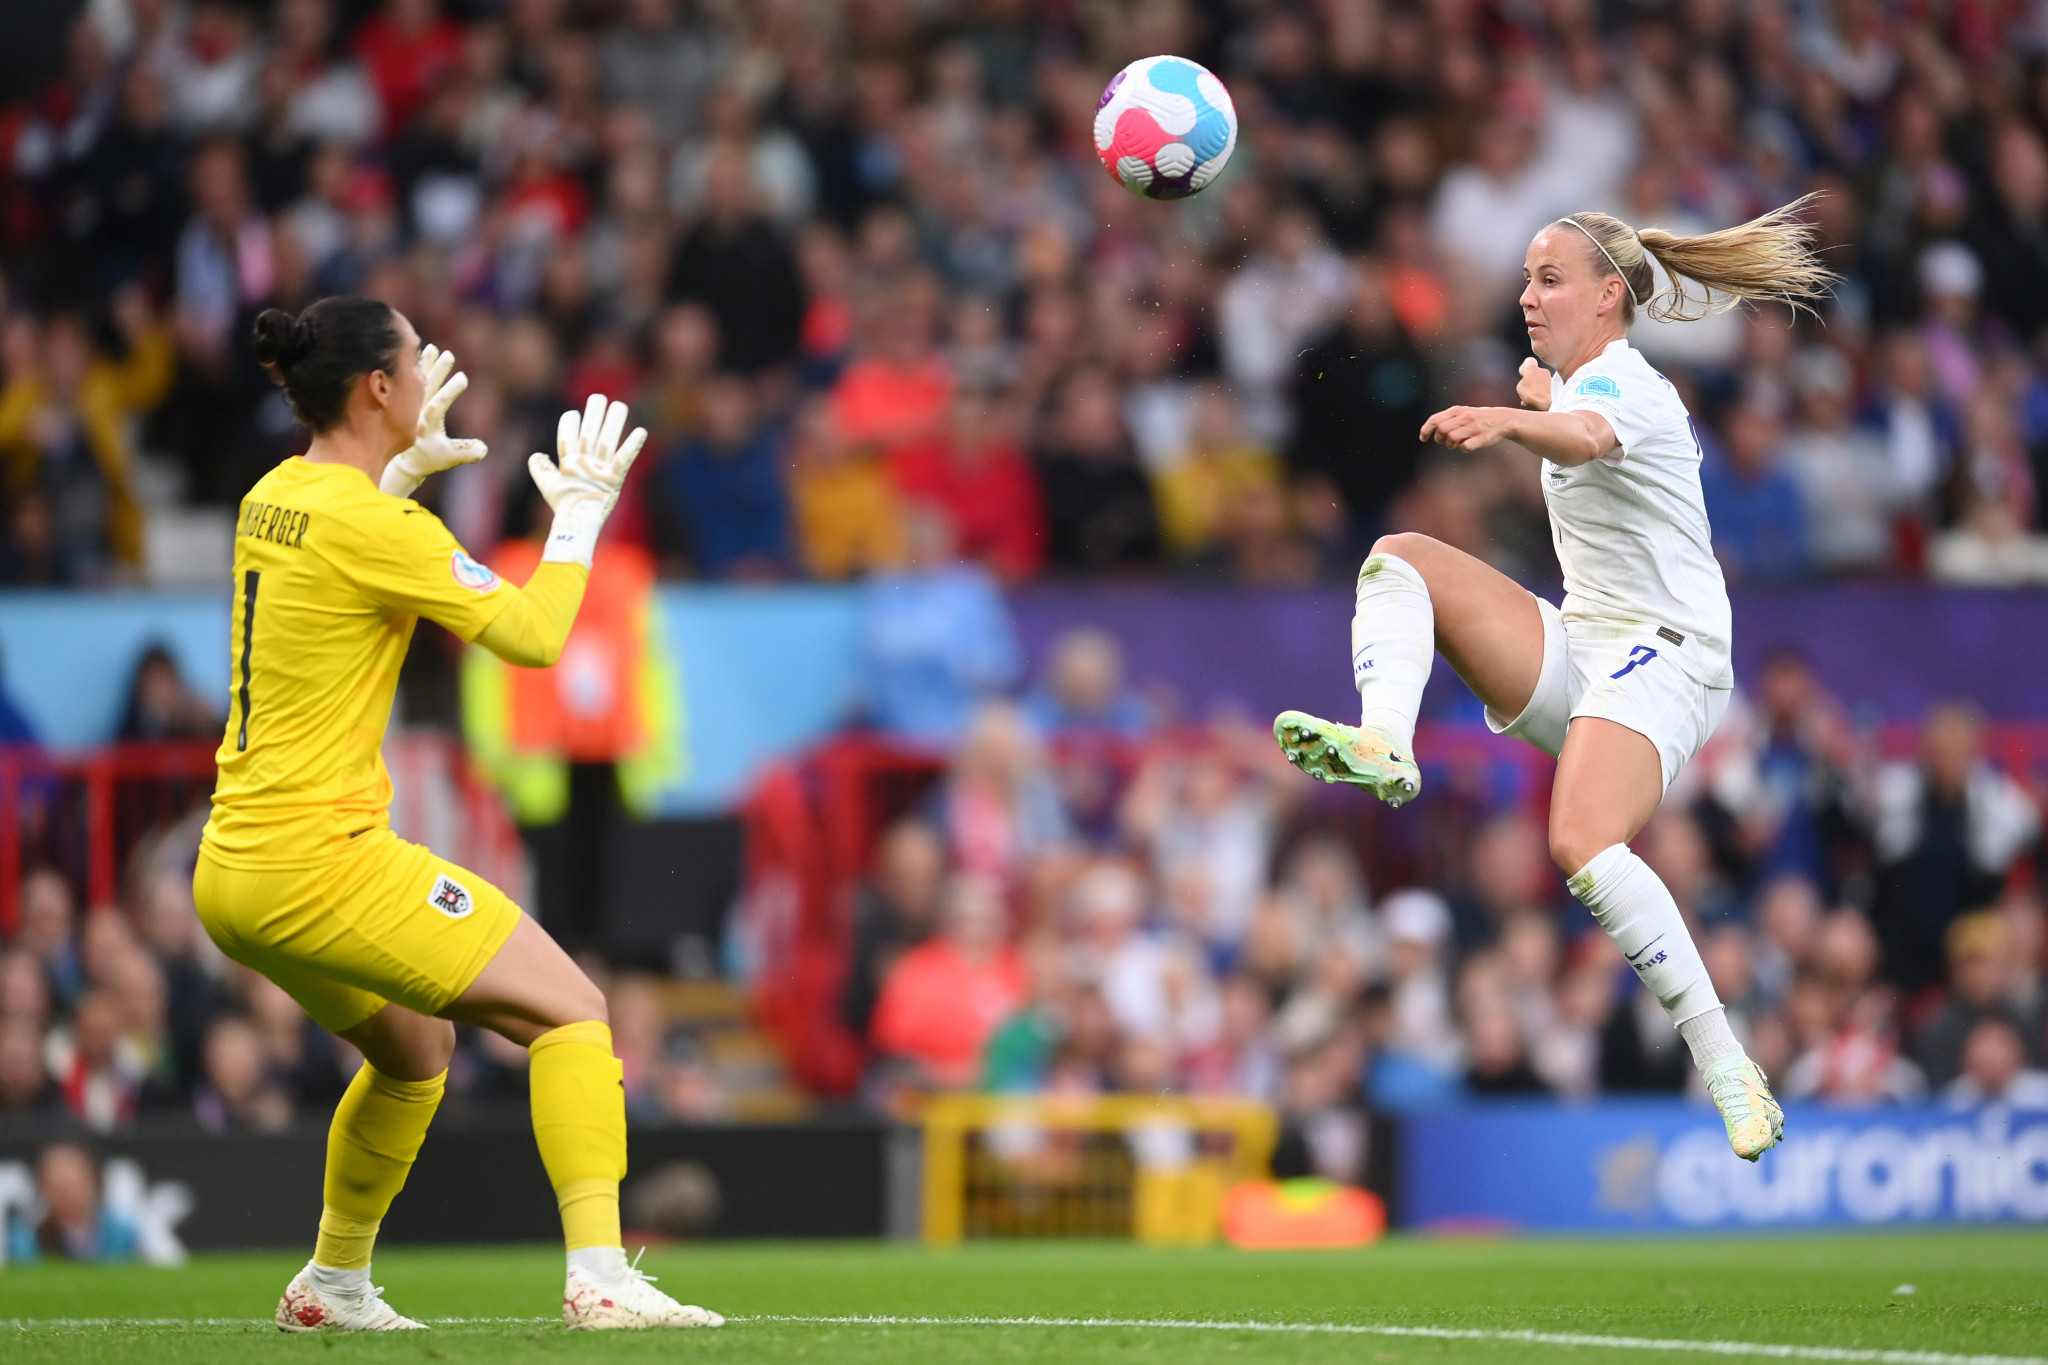 Beth Mead scored the only goal as England got off to a winning start at UEFA Women's Euro 2022 ©Getty Images